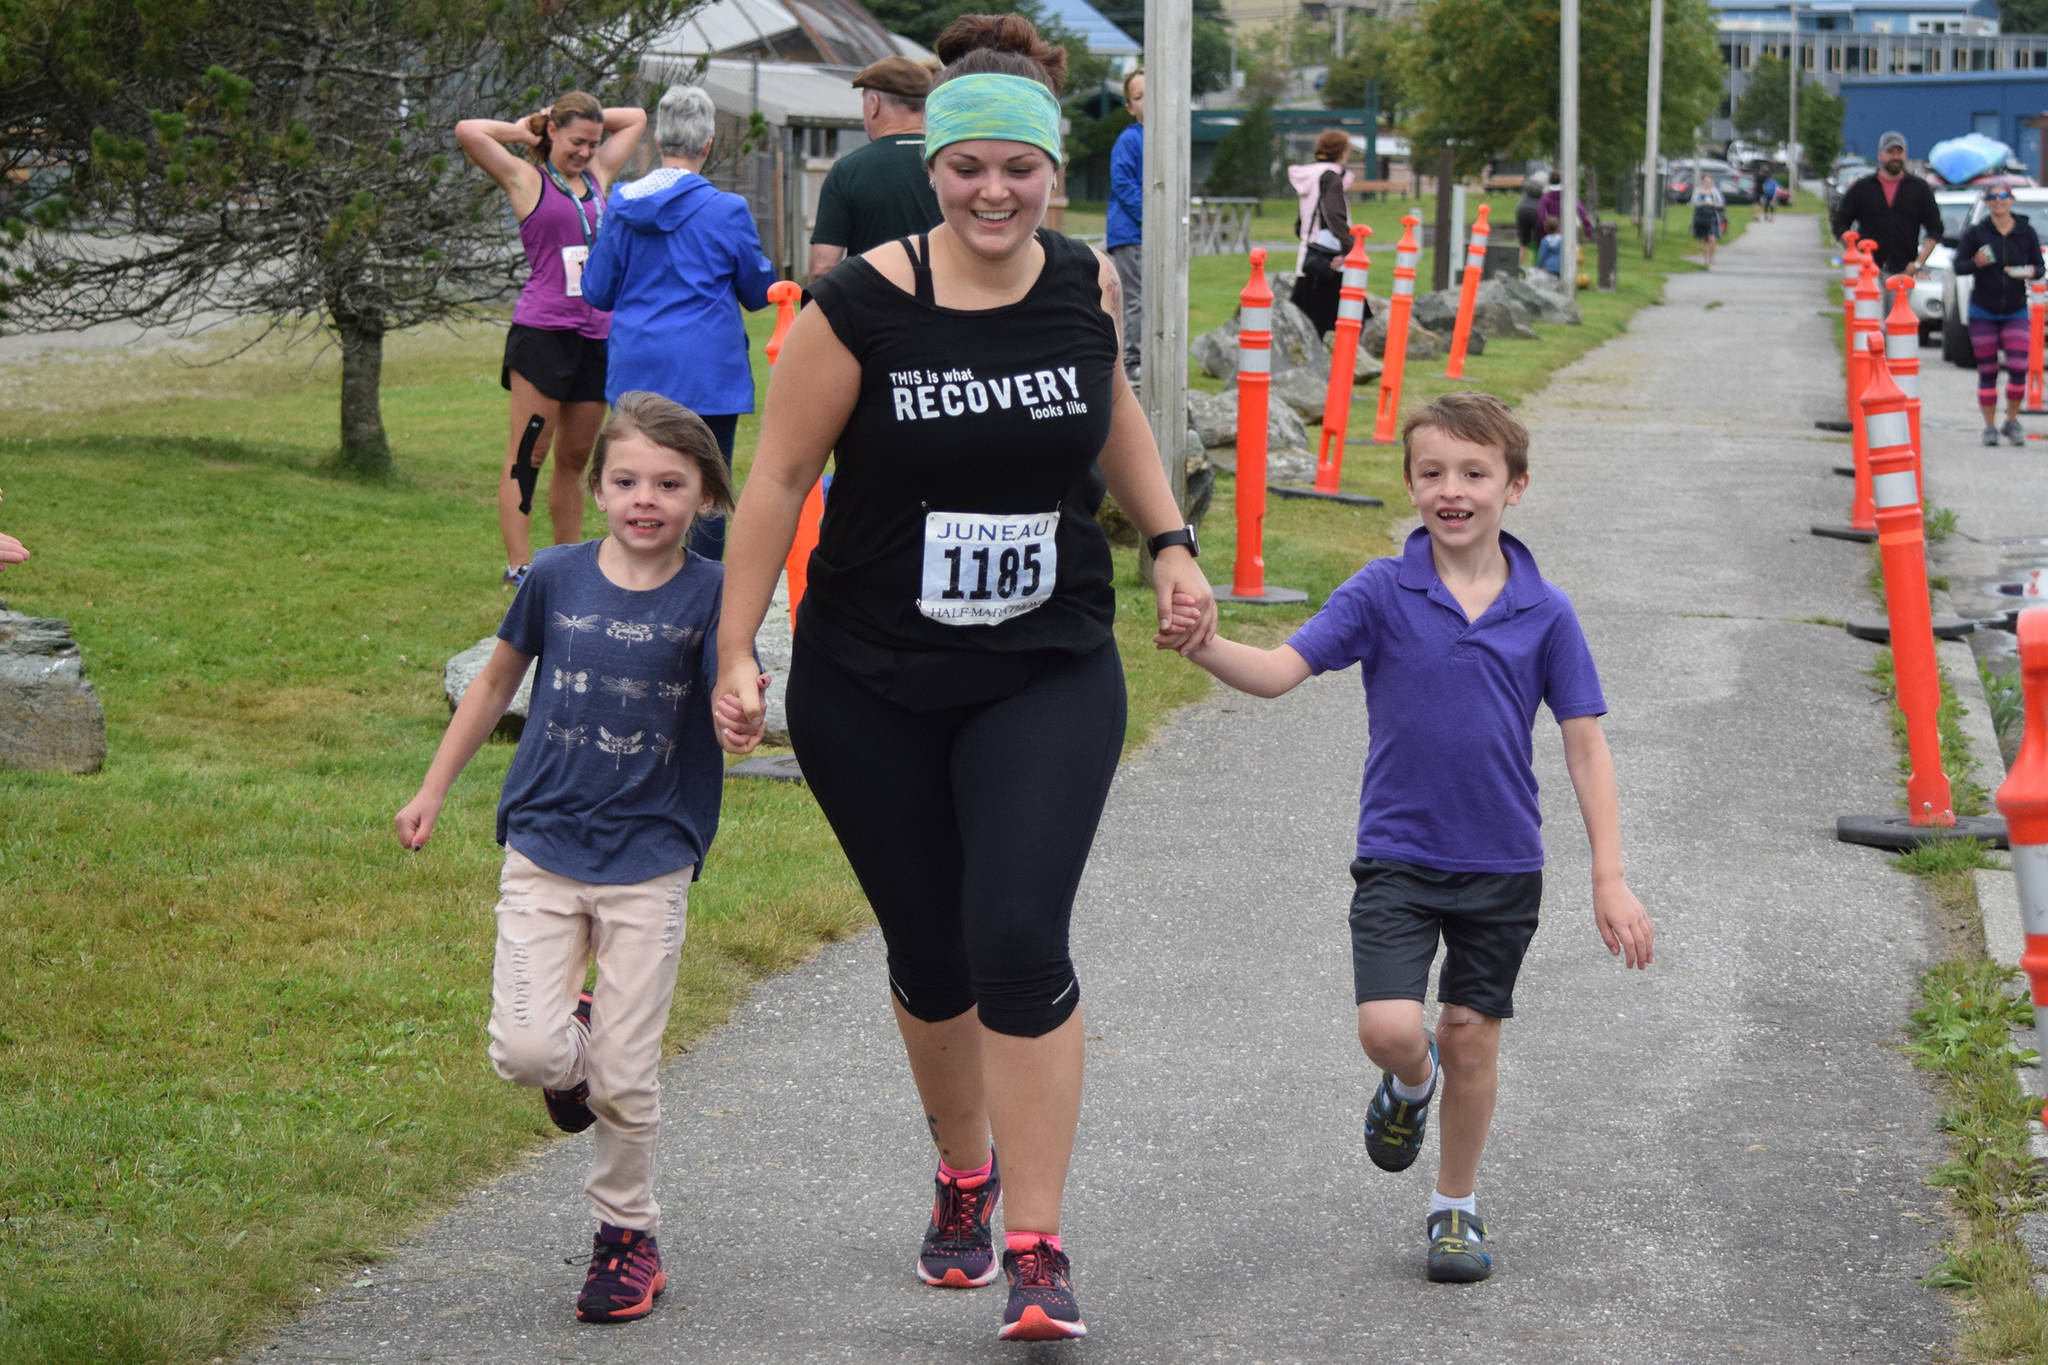 From revelers, to out-of-towners, to those in recovery, Juneau Marathon draws diverse crowd